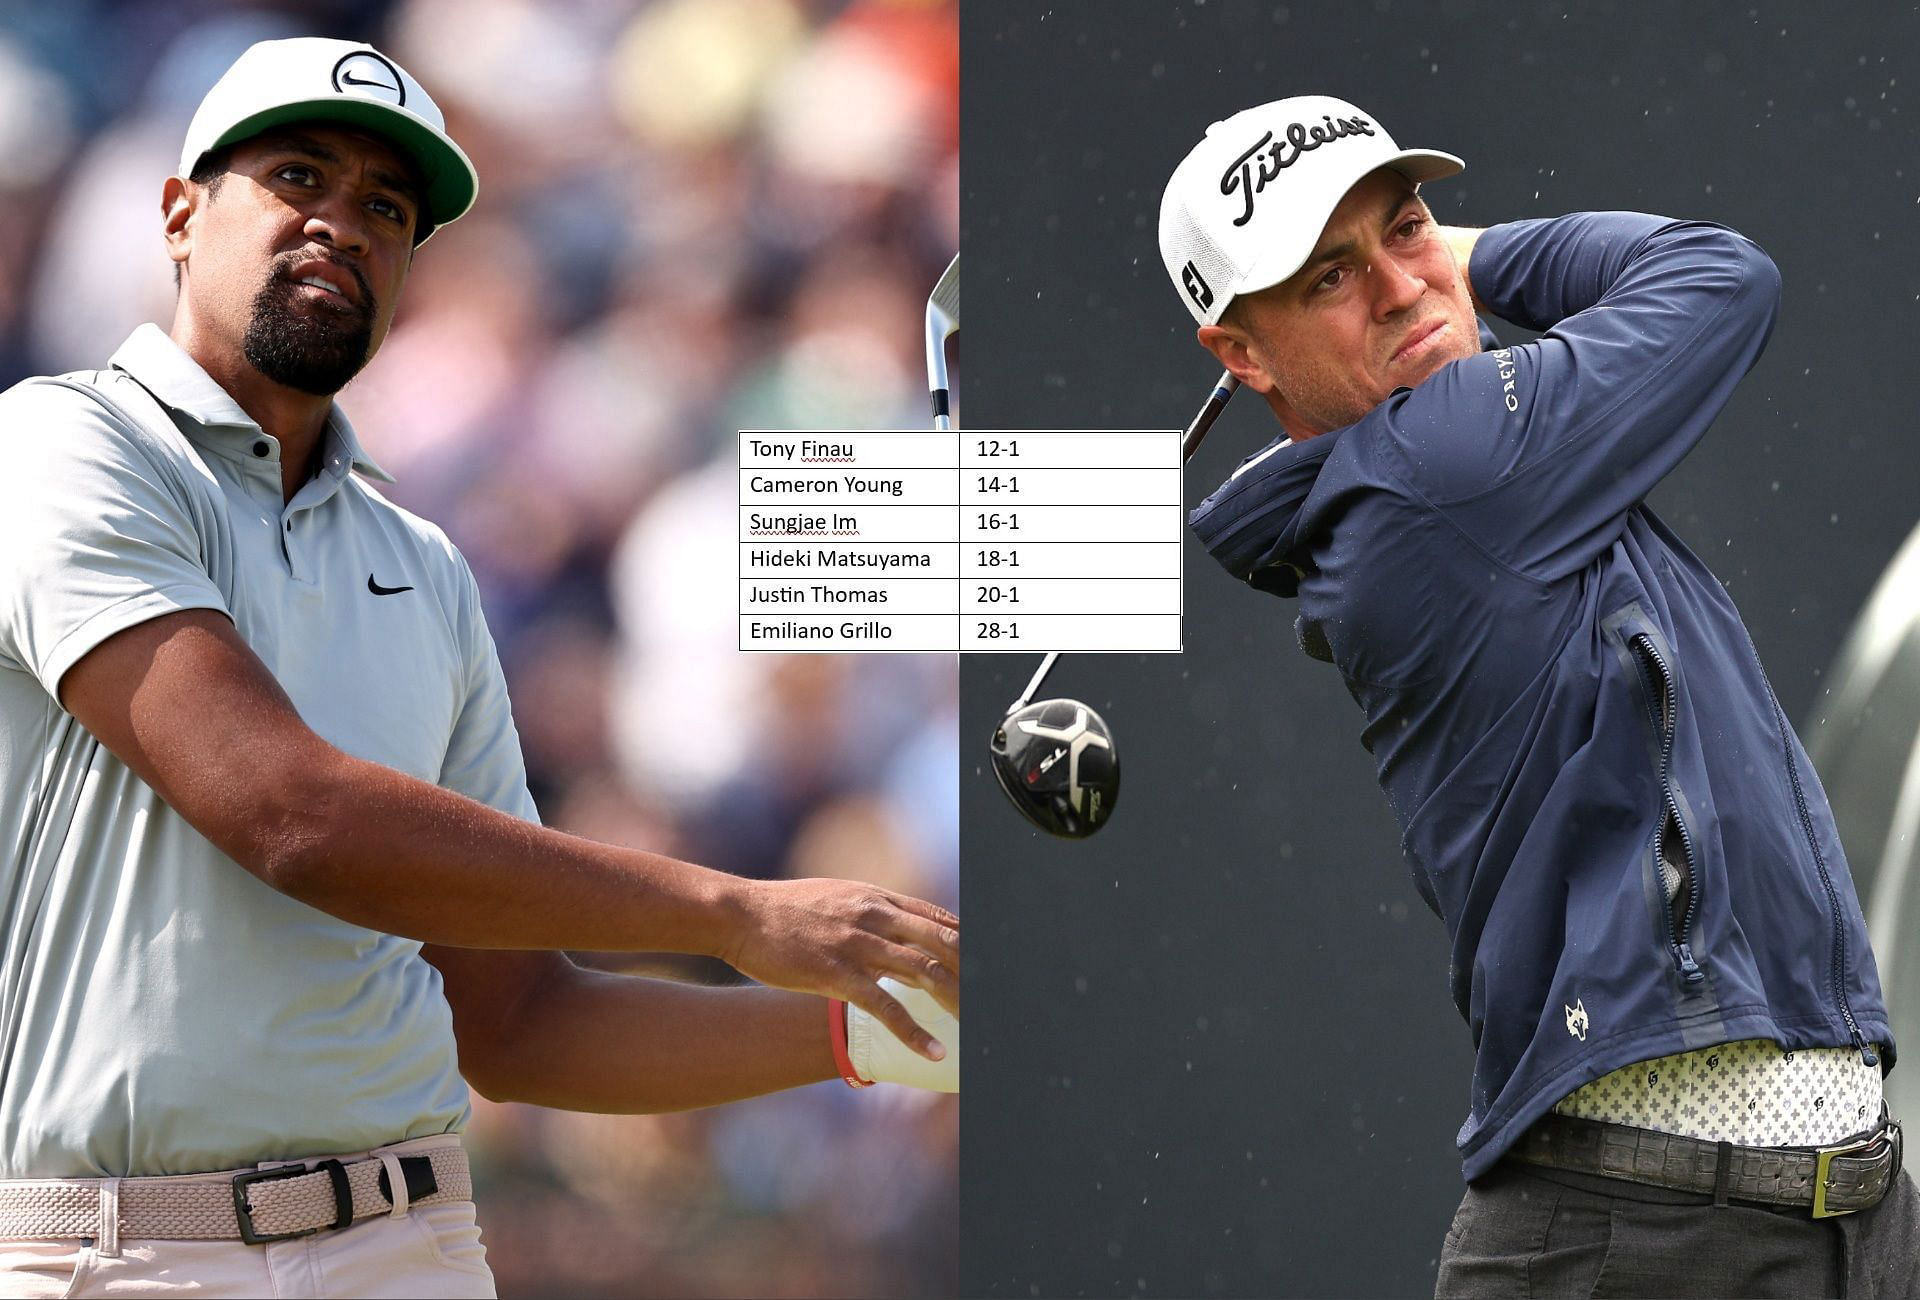 2023 3M Open odds and updated bets ft. Tony Finau, Justin Thomas and more